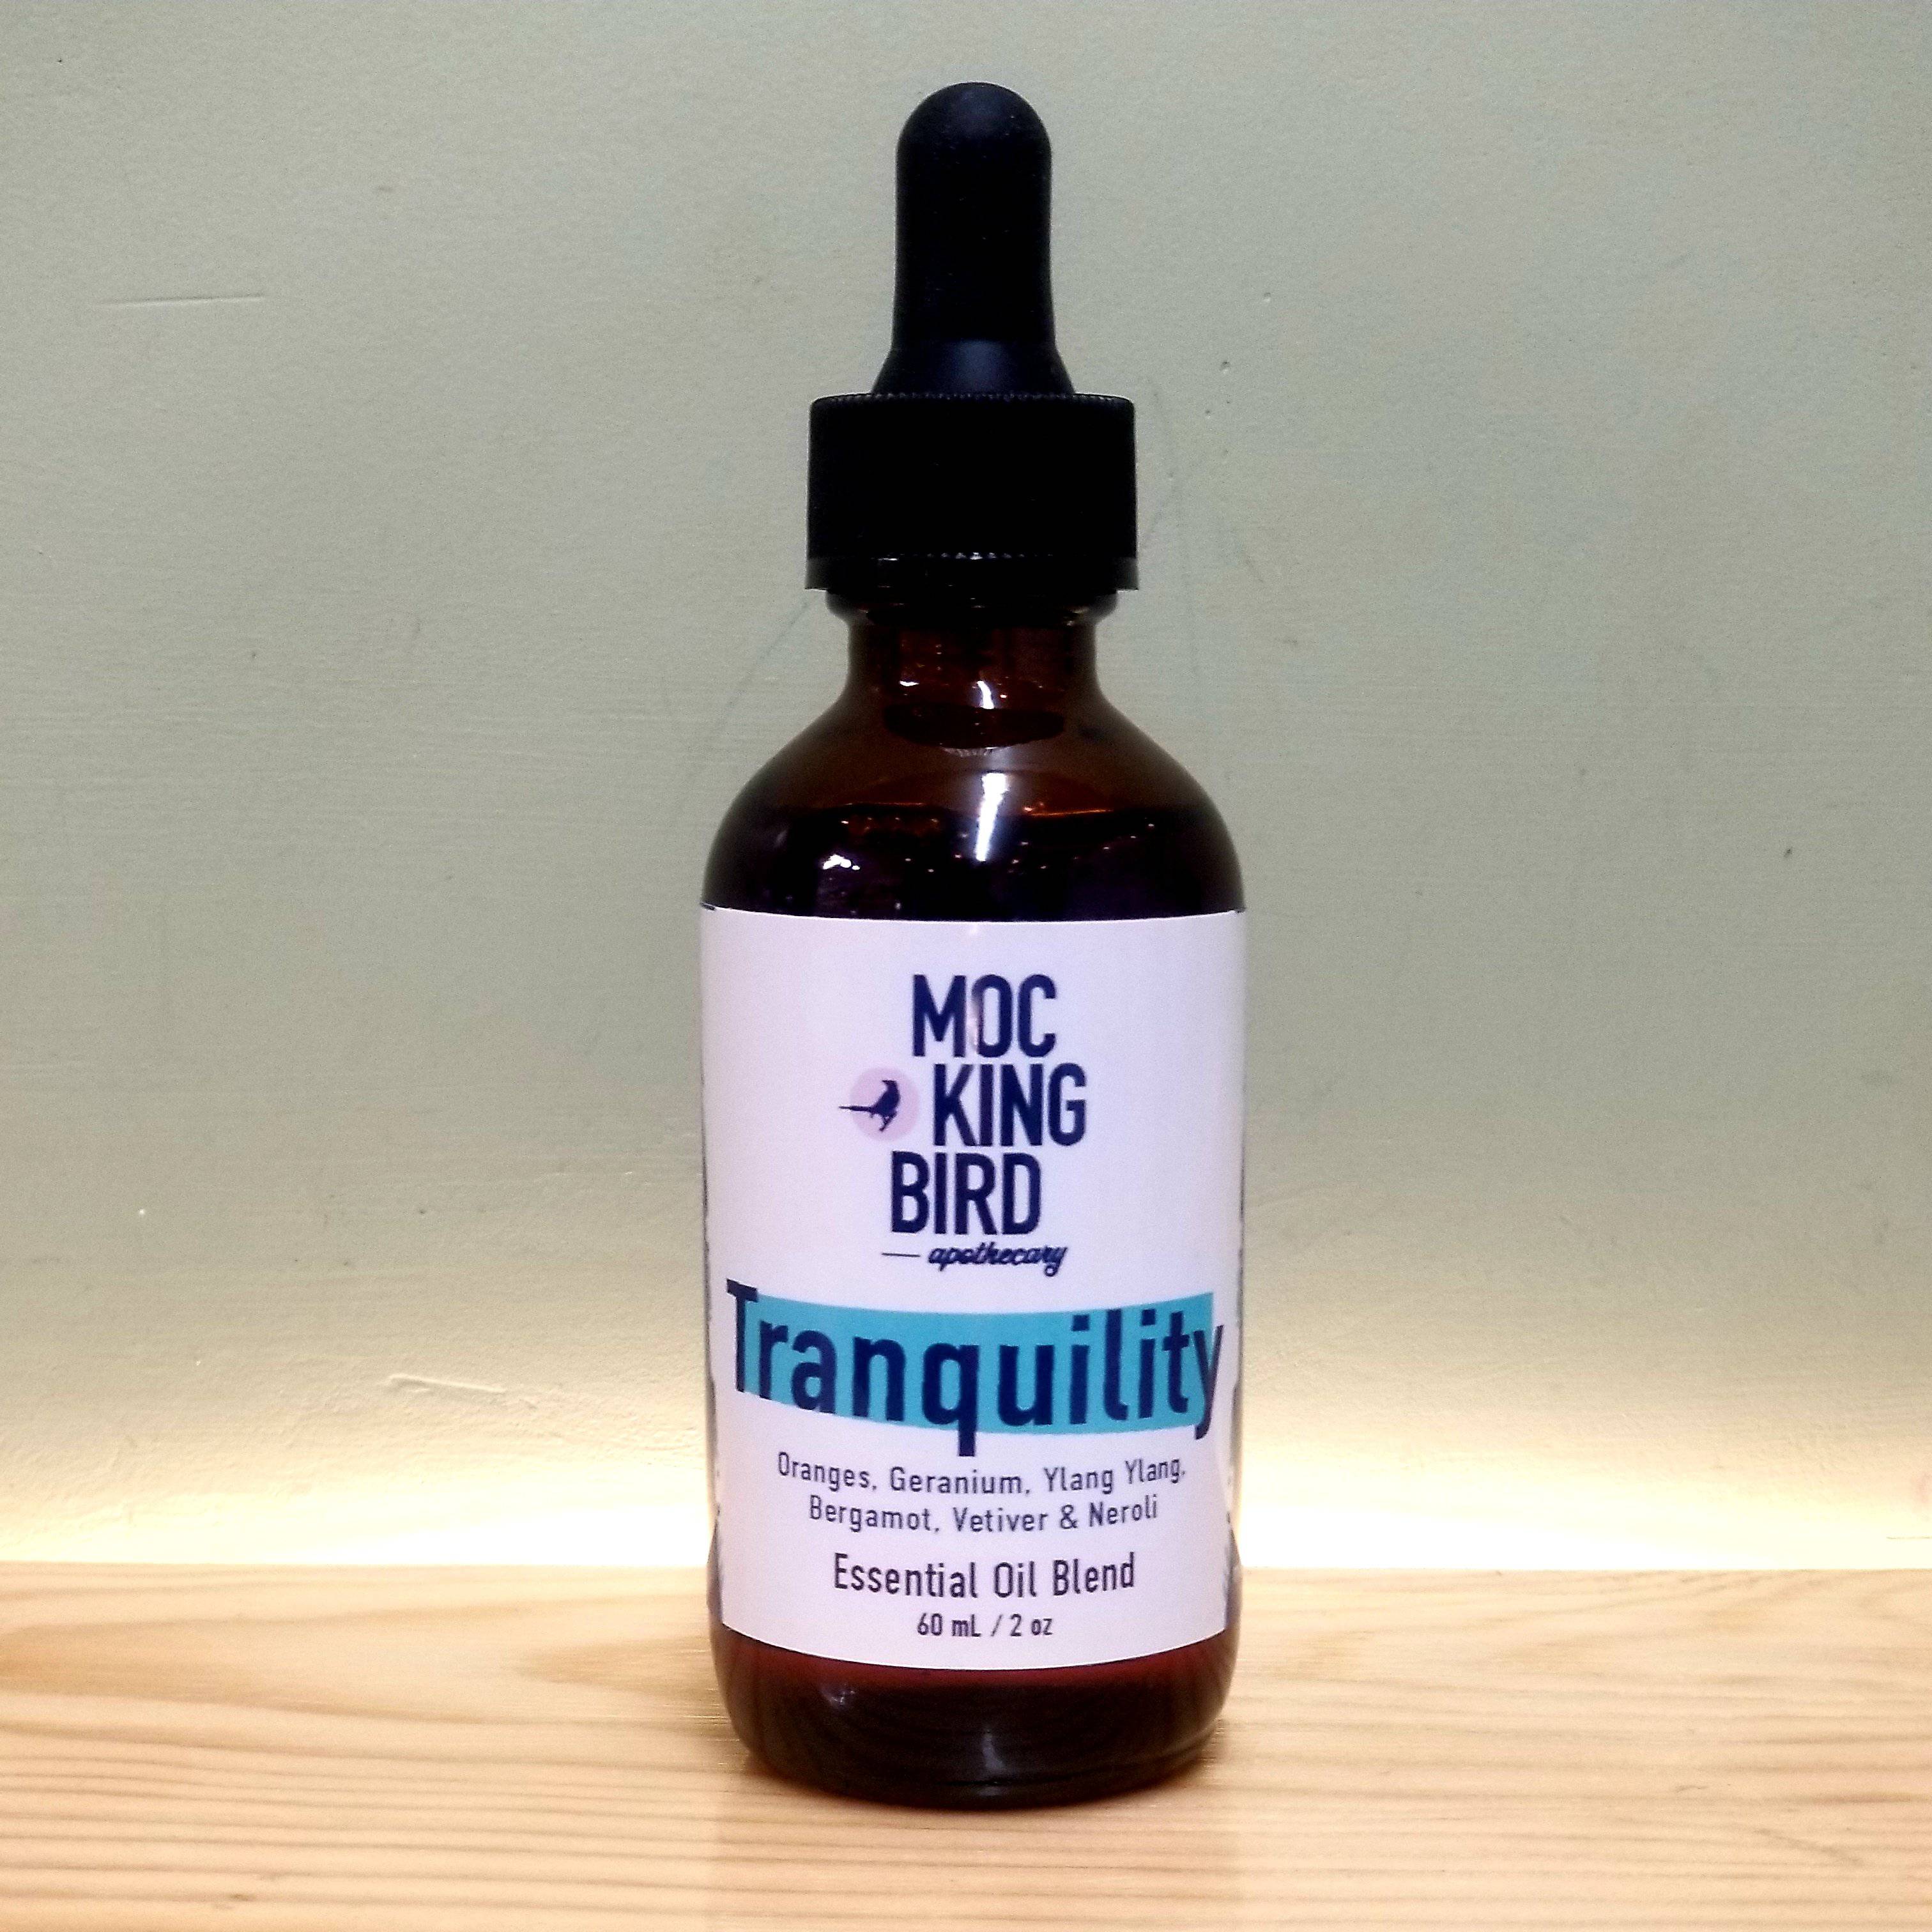 Tranquility Essential Oil Blend - The Mockingbird Apothecary & General Store